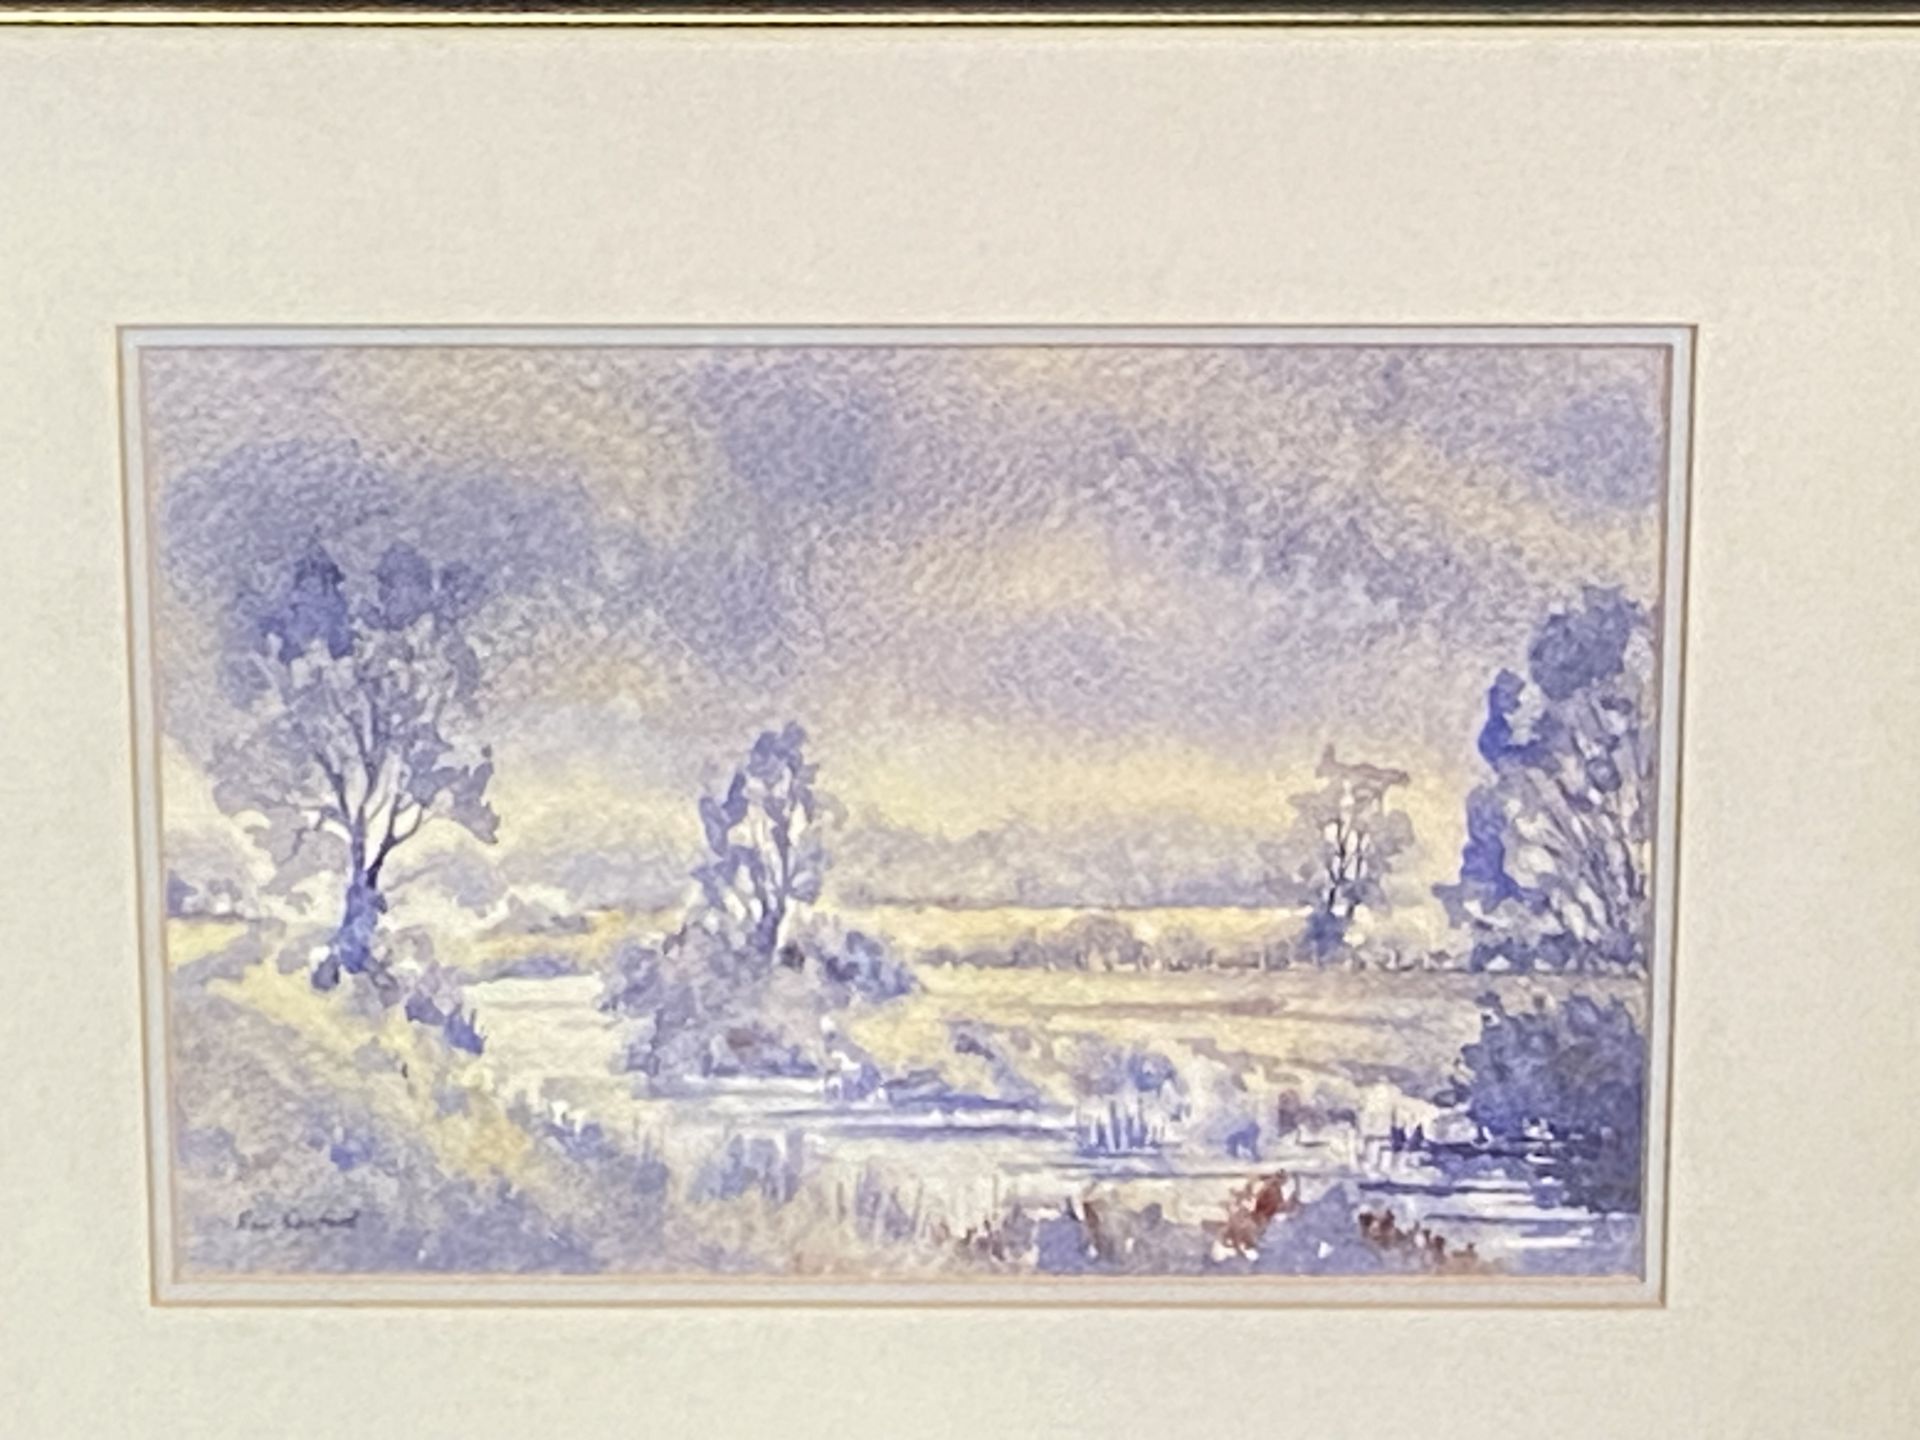 Framed and glazed watercolour by Ron Cosford - Image 2 of 3